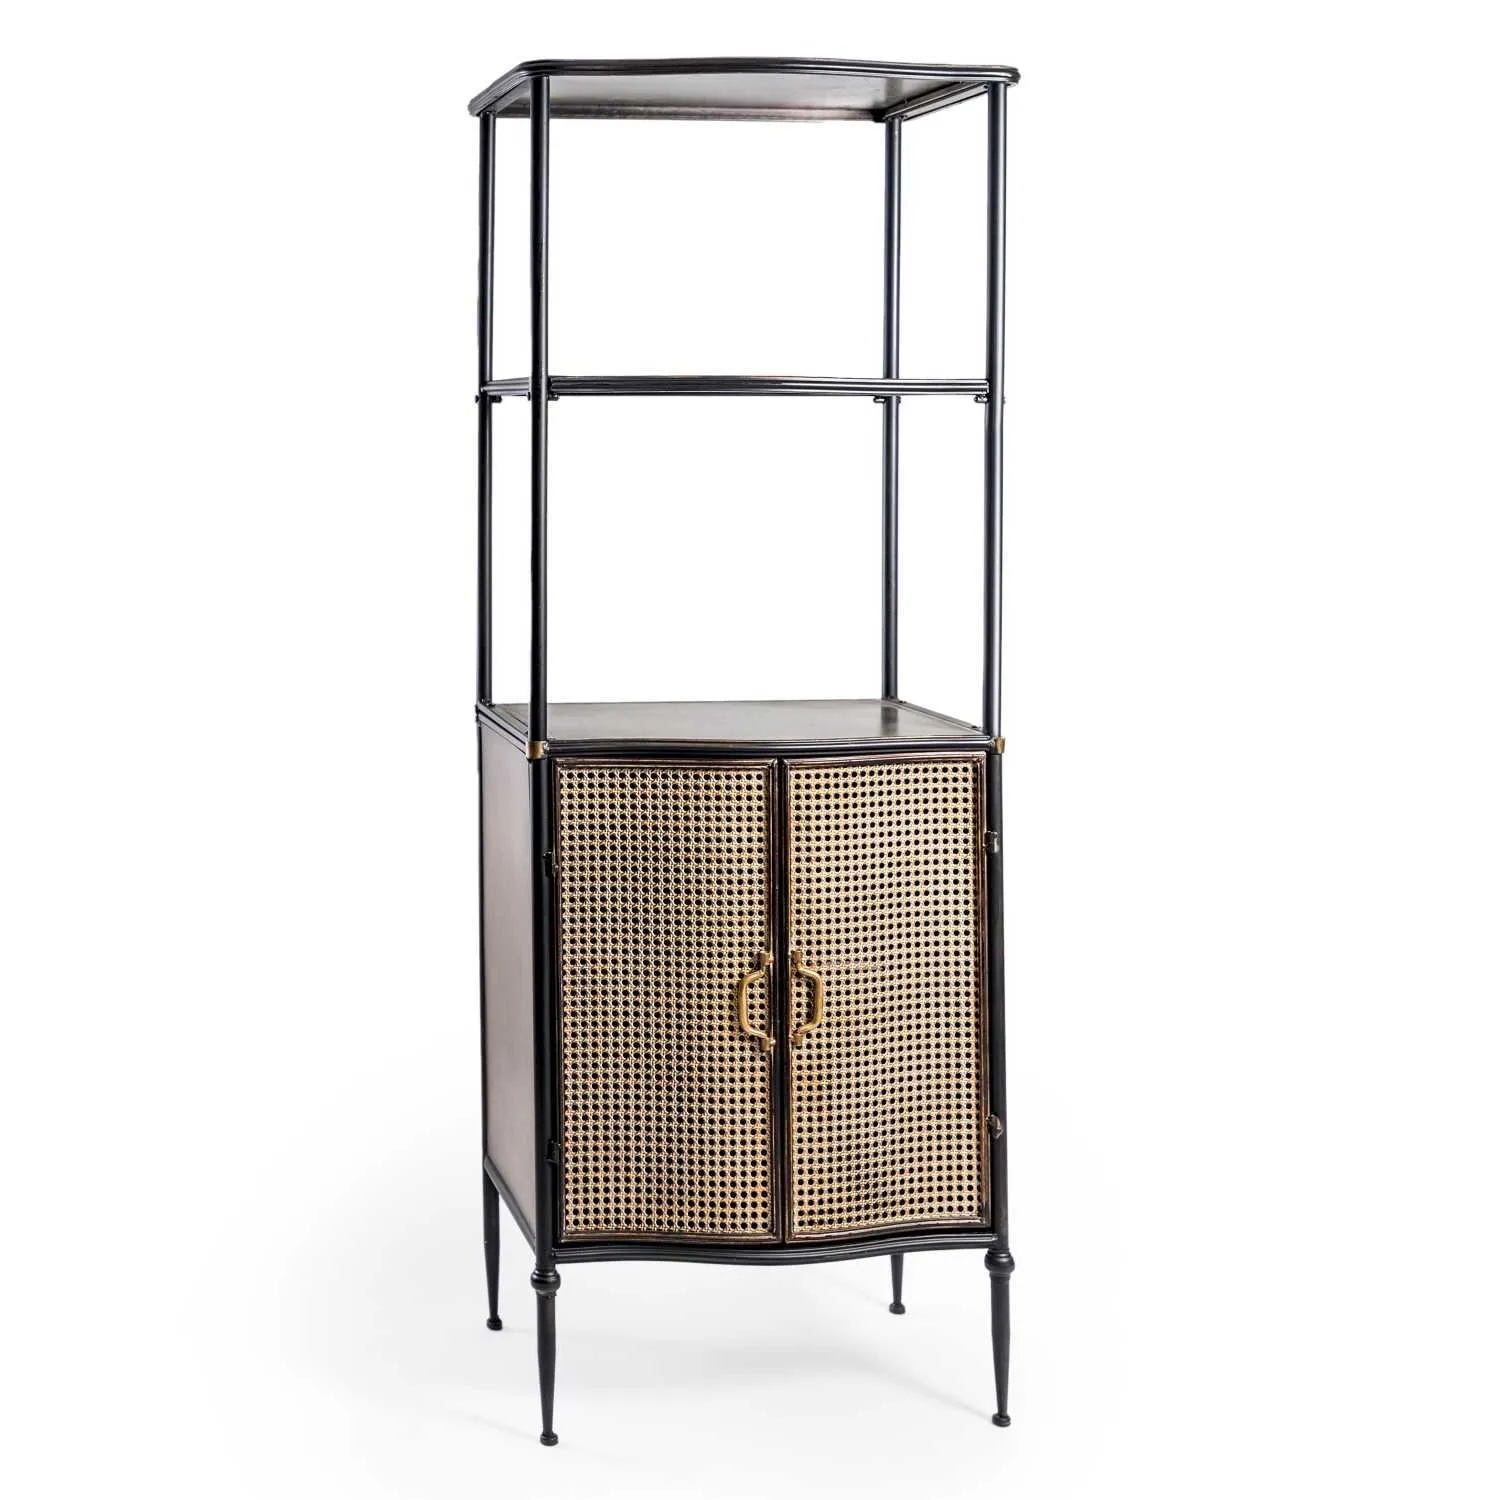 Black Metal Tall Shelving Unit with Cupboard Base